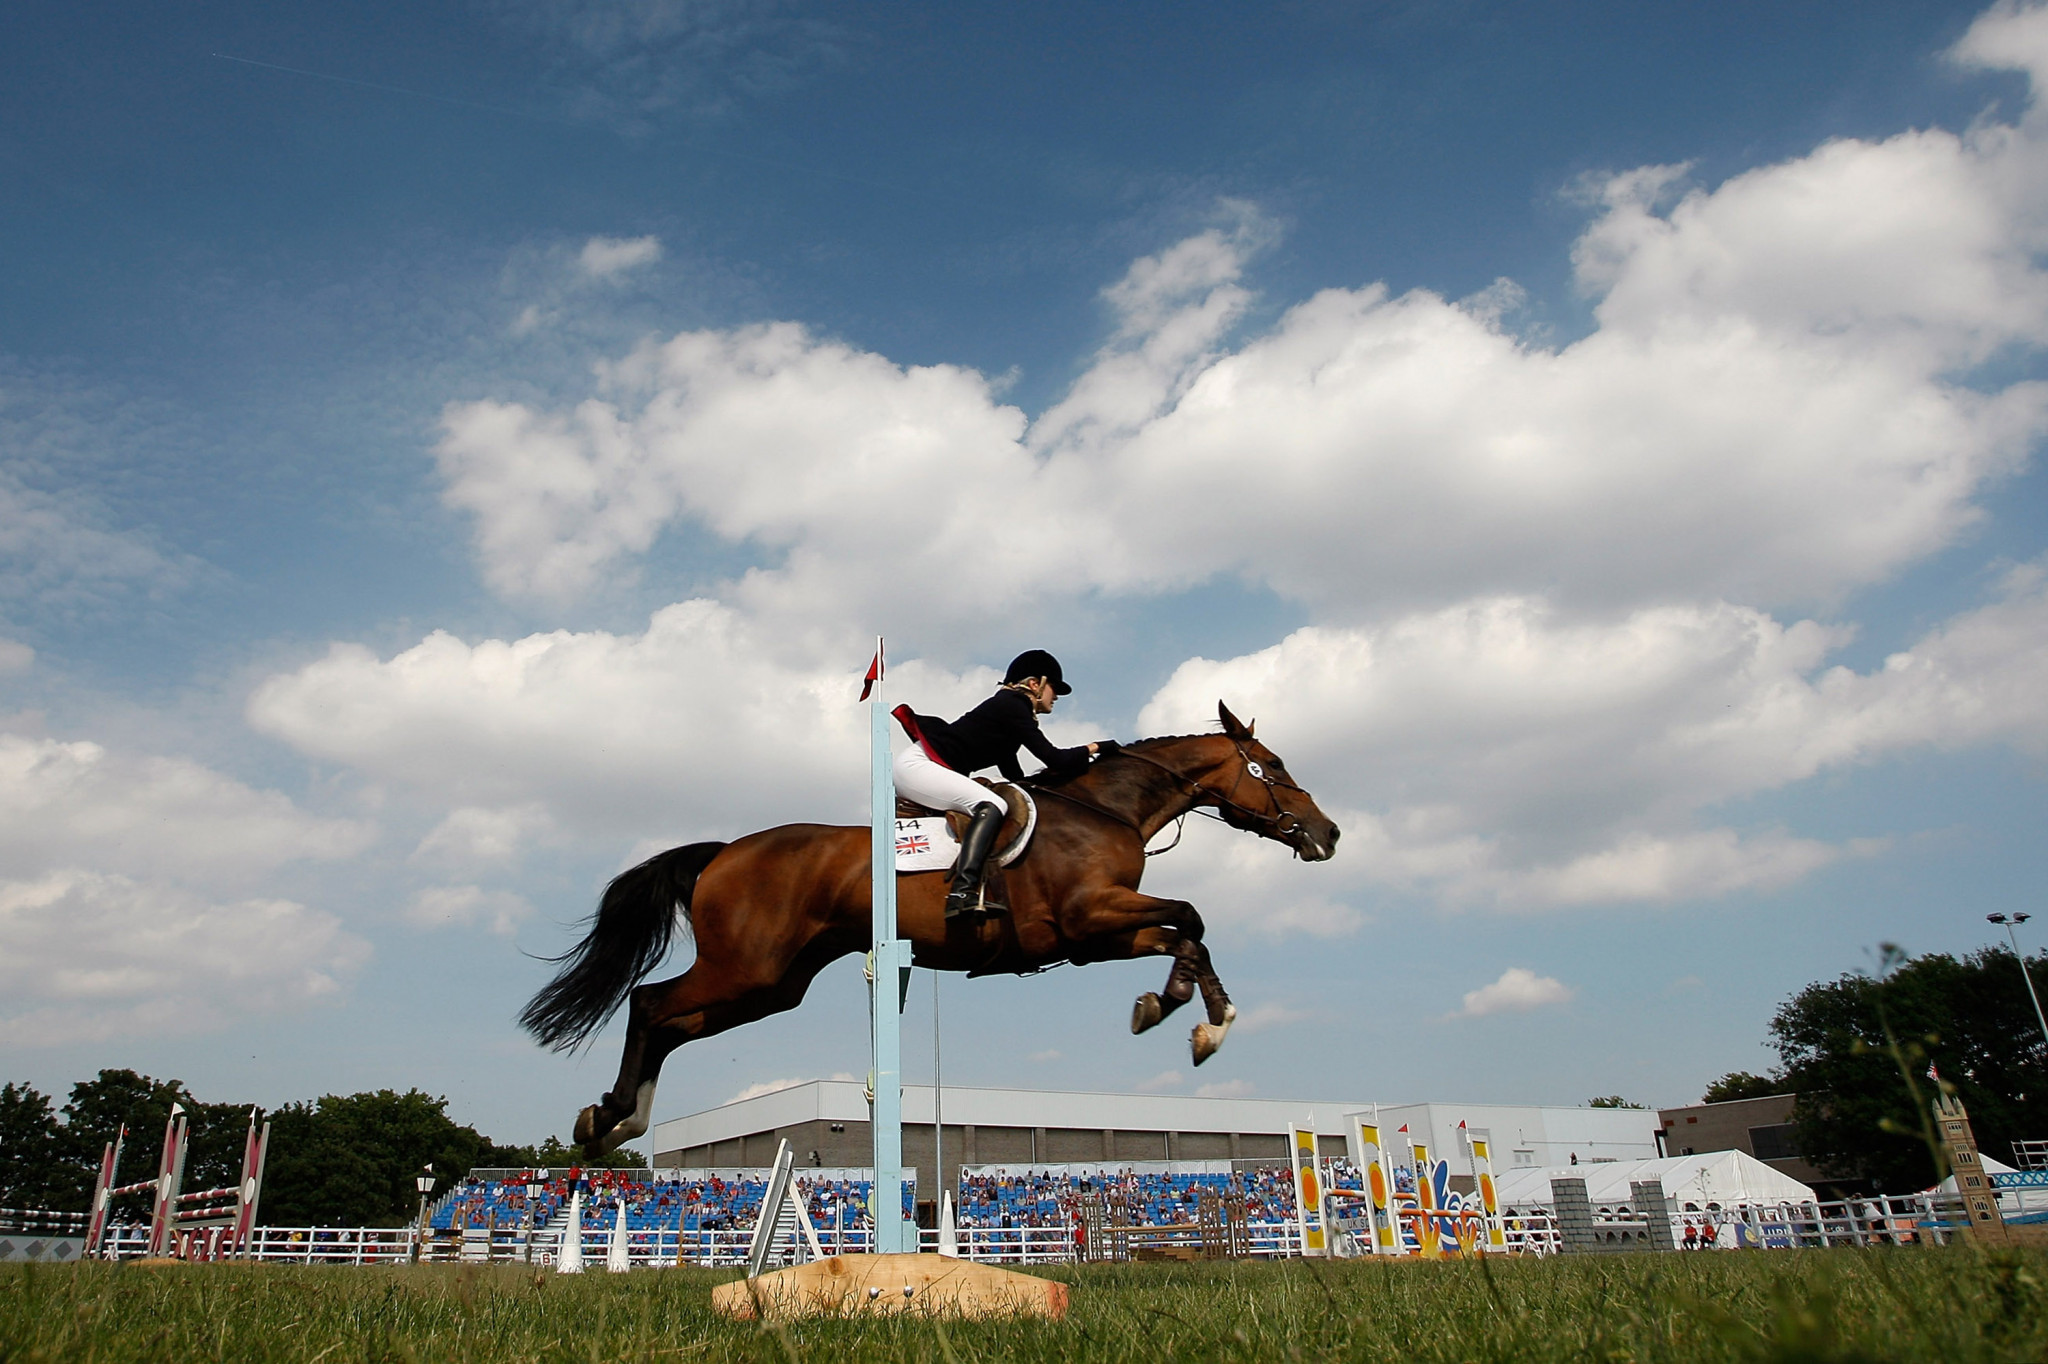 The UIPM has passed a motion that can remove riding from modern pentathlon ©Getty Images